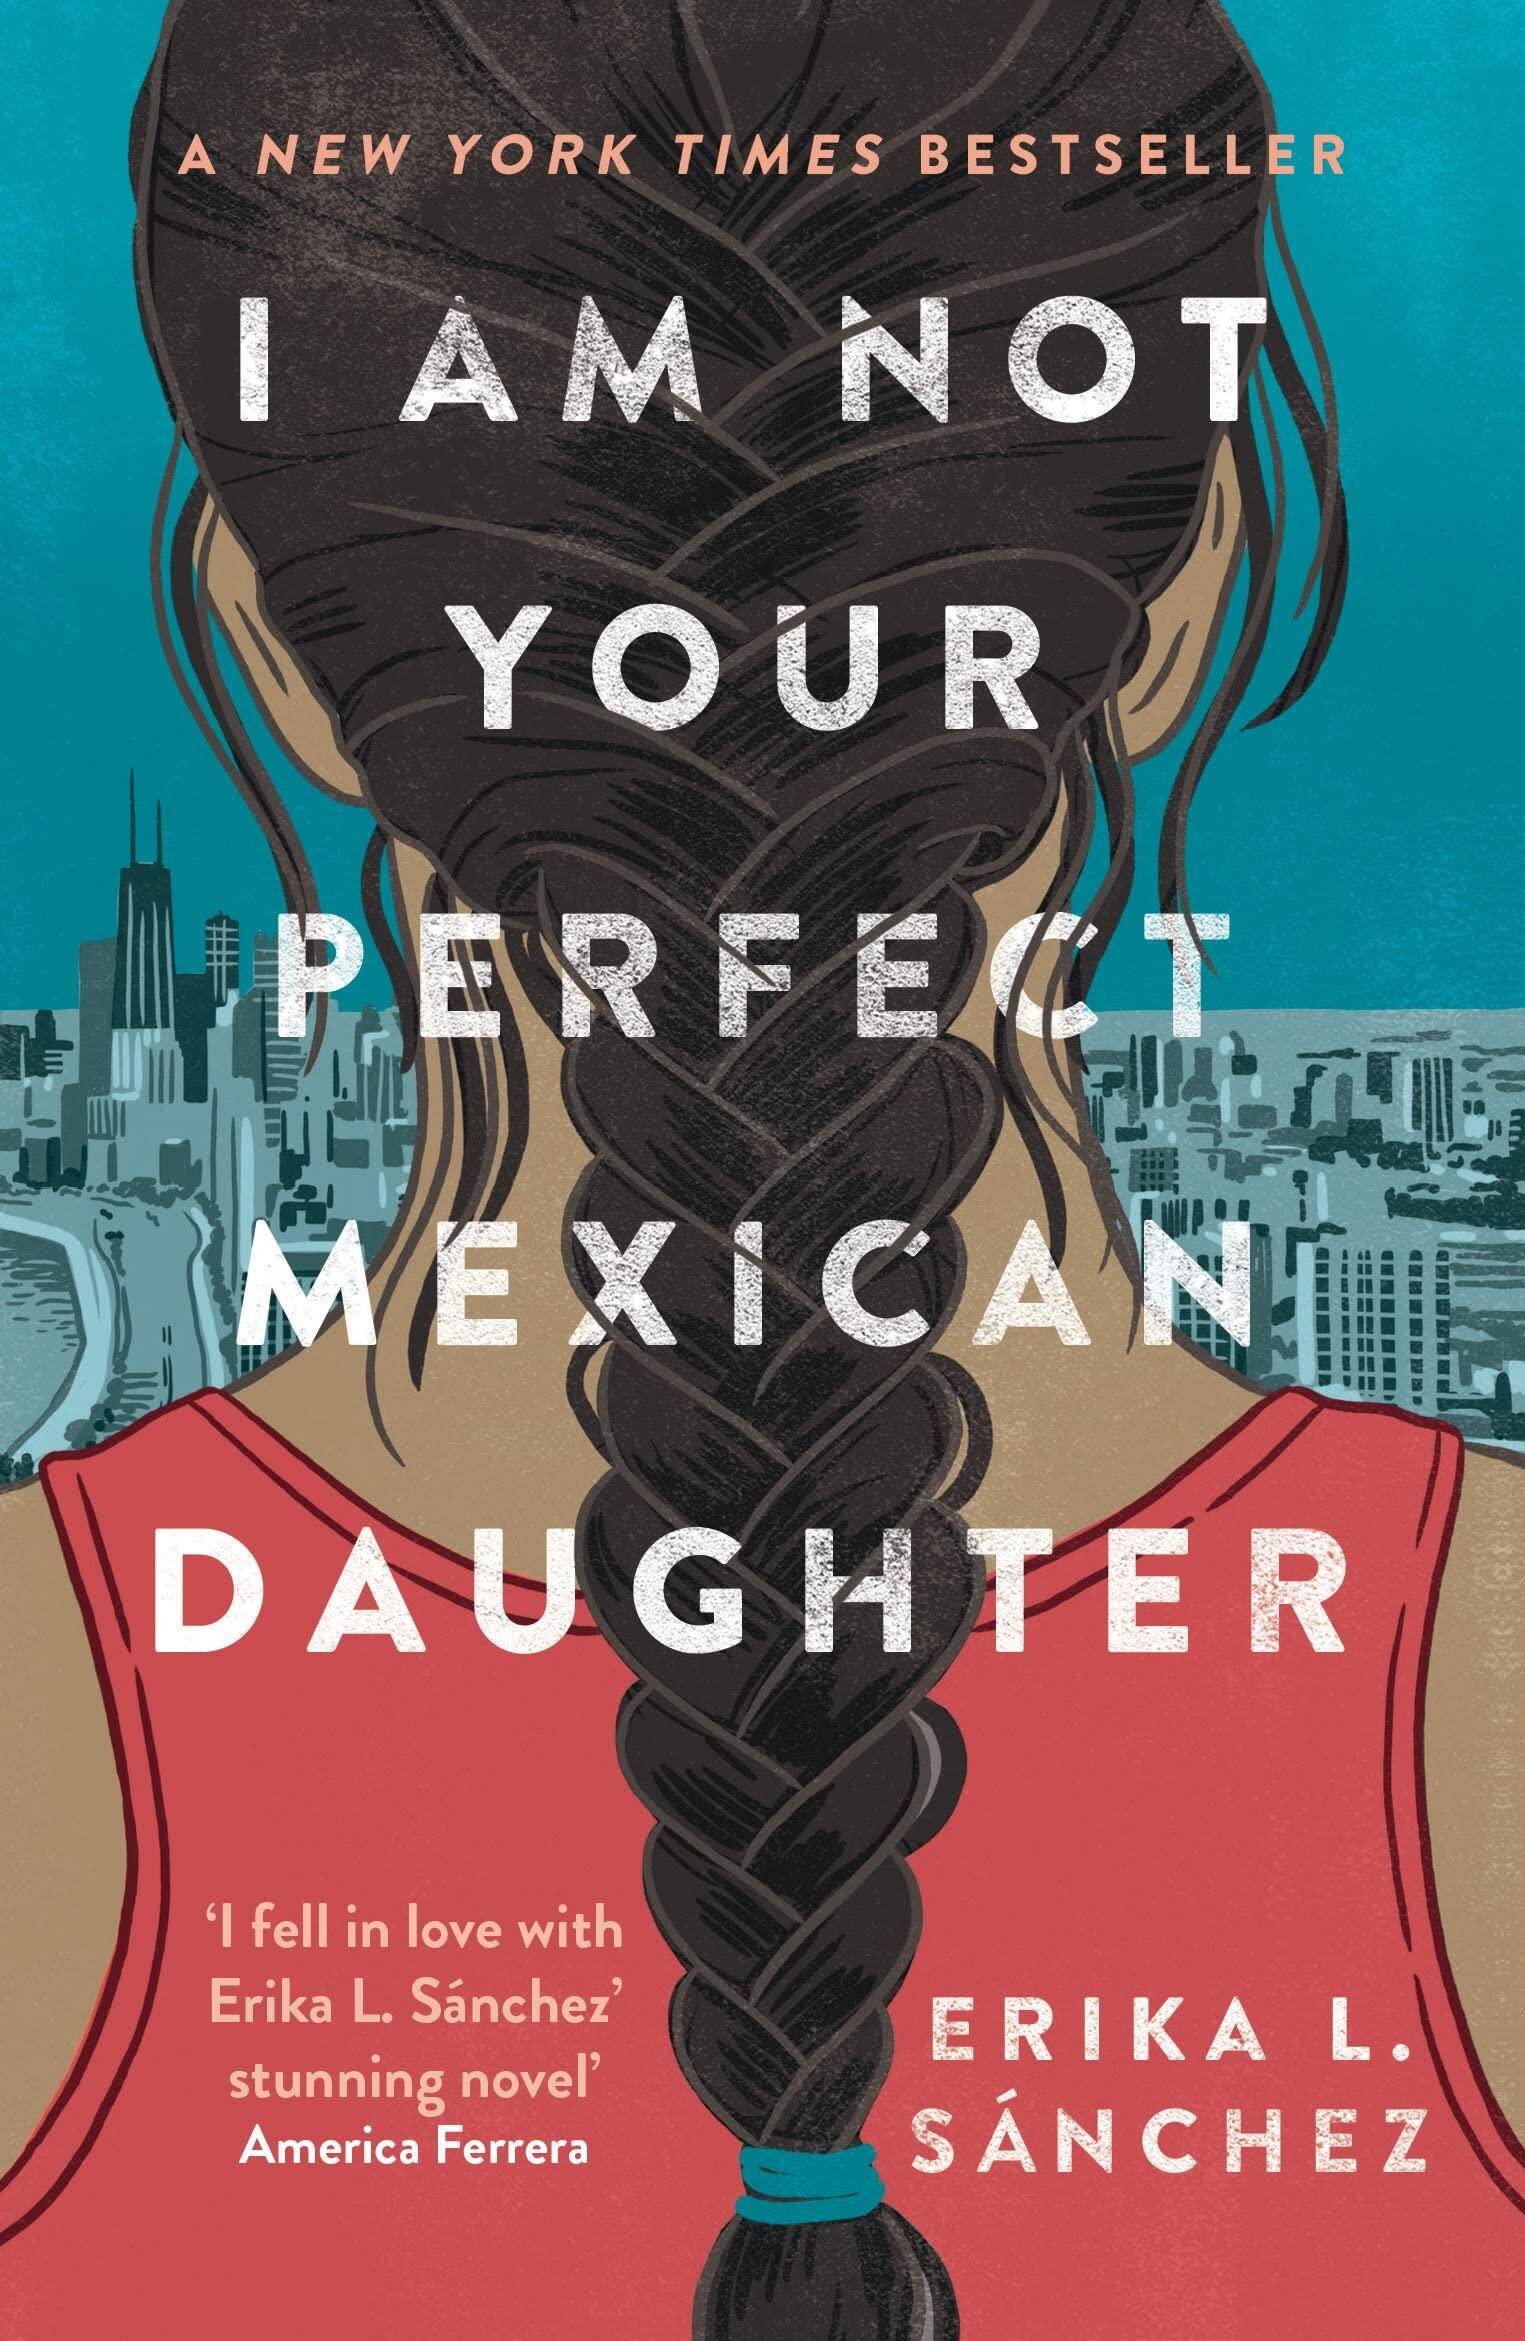 I am not your perfect daughter